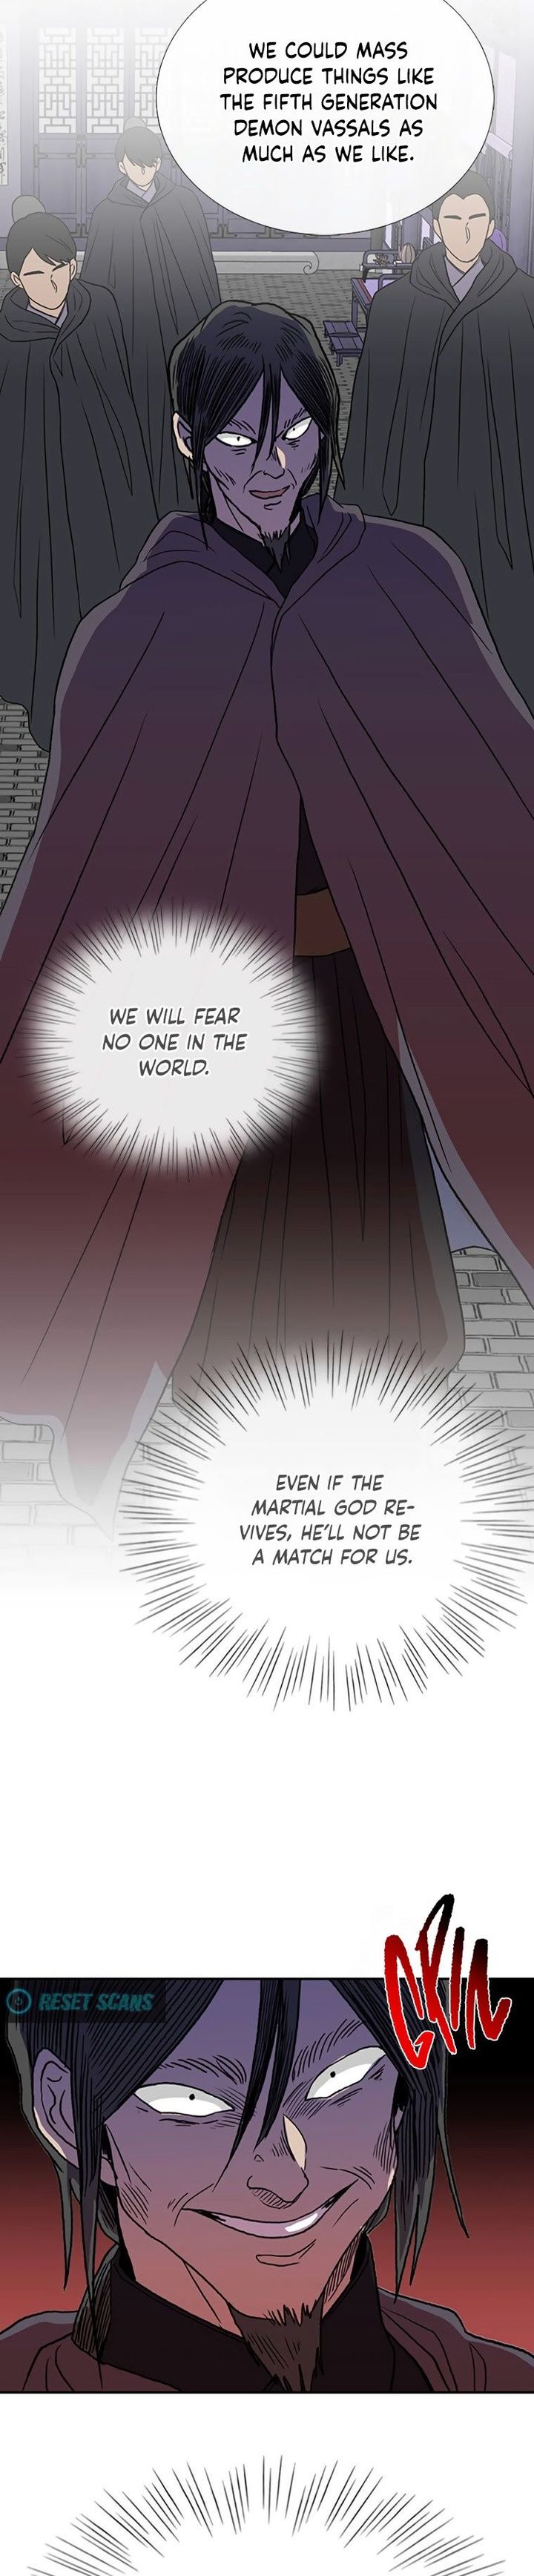 The Scholars Reincarnation Chapter 170 Page 6